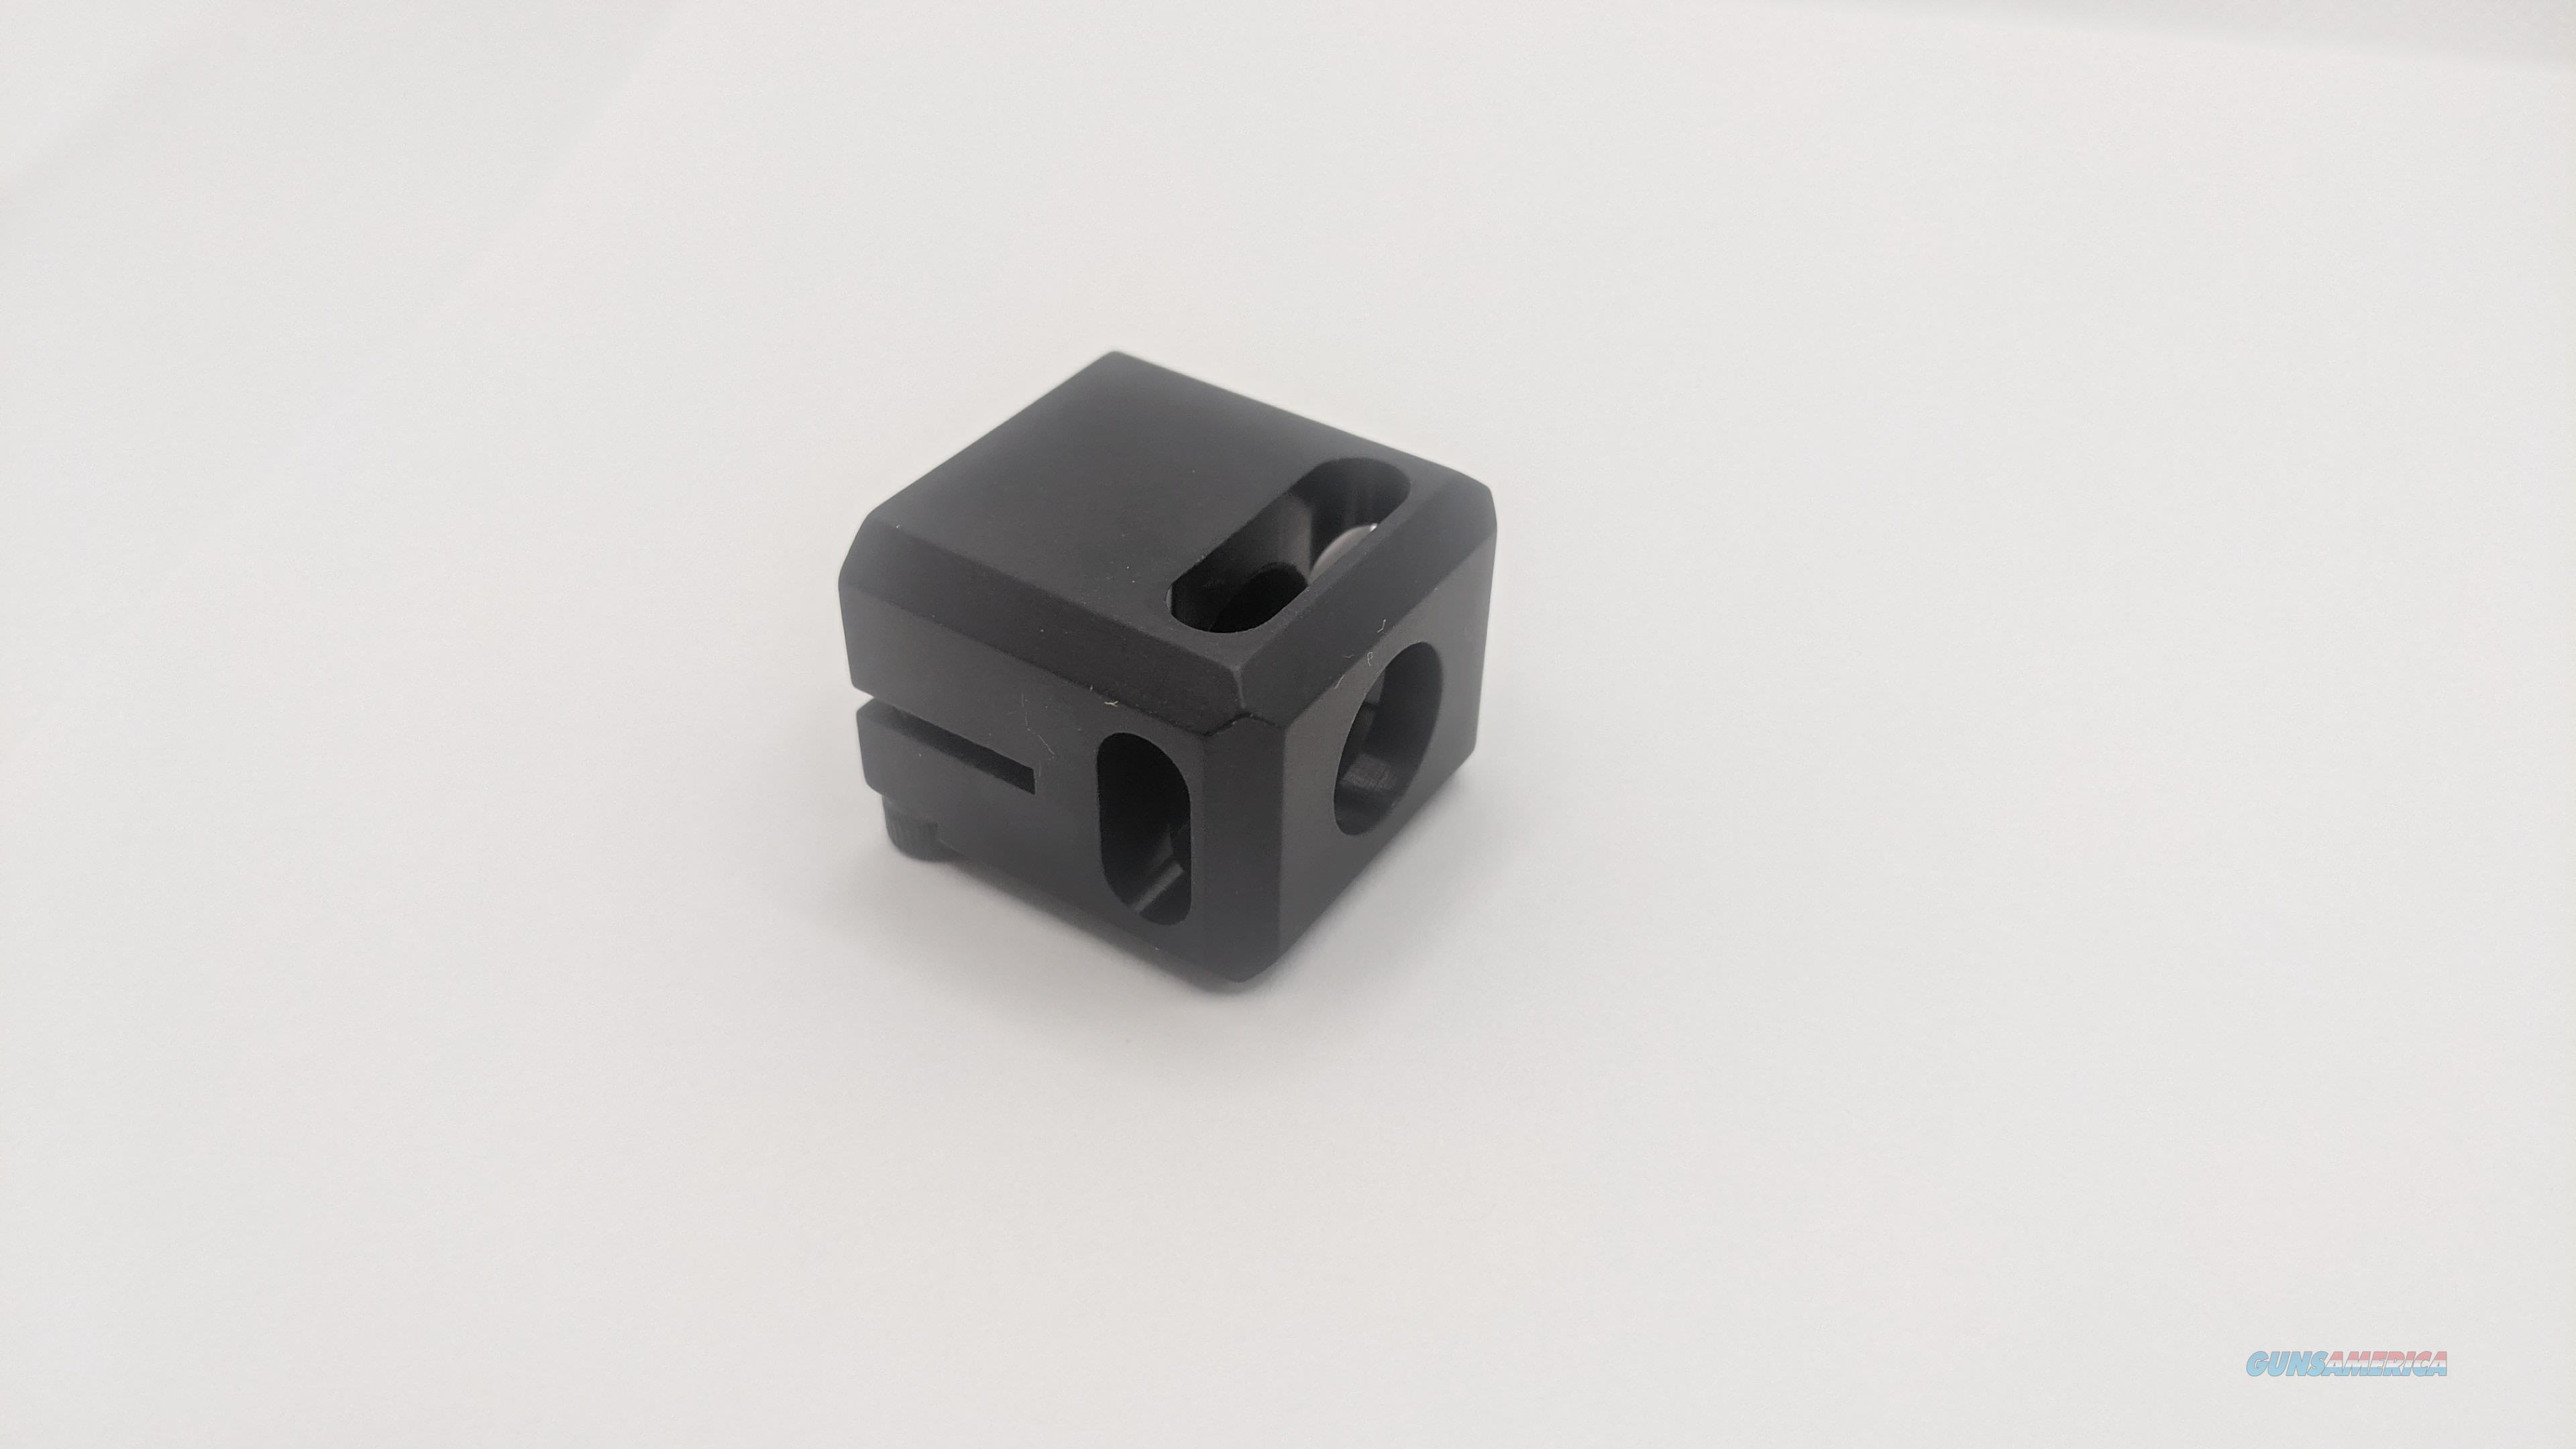 9mm Conceal Carry Muzzle Brake - /. for sale at Gunsamerica.com .